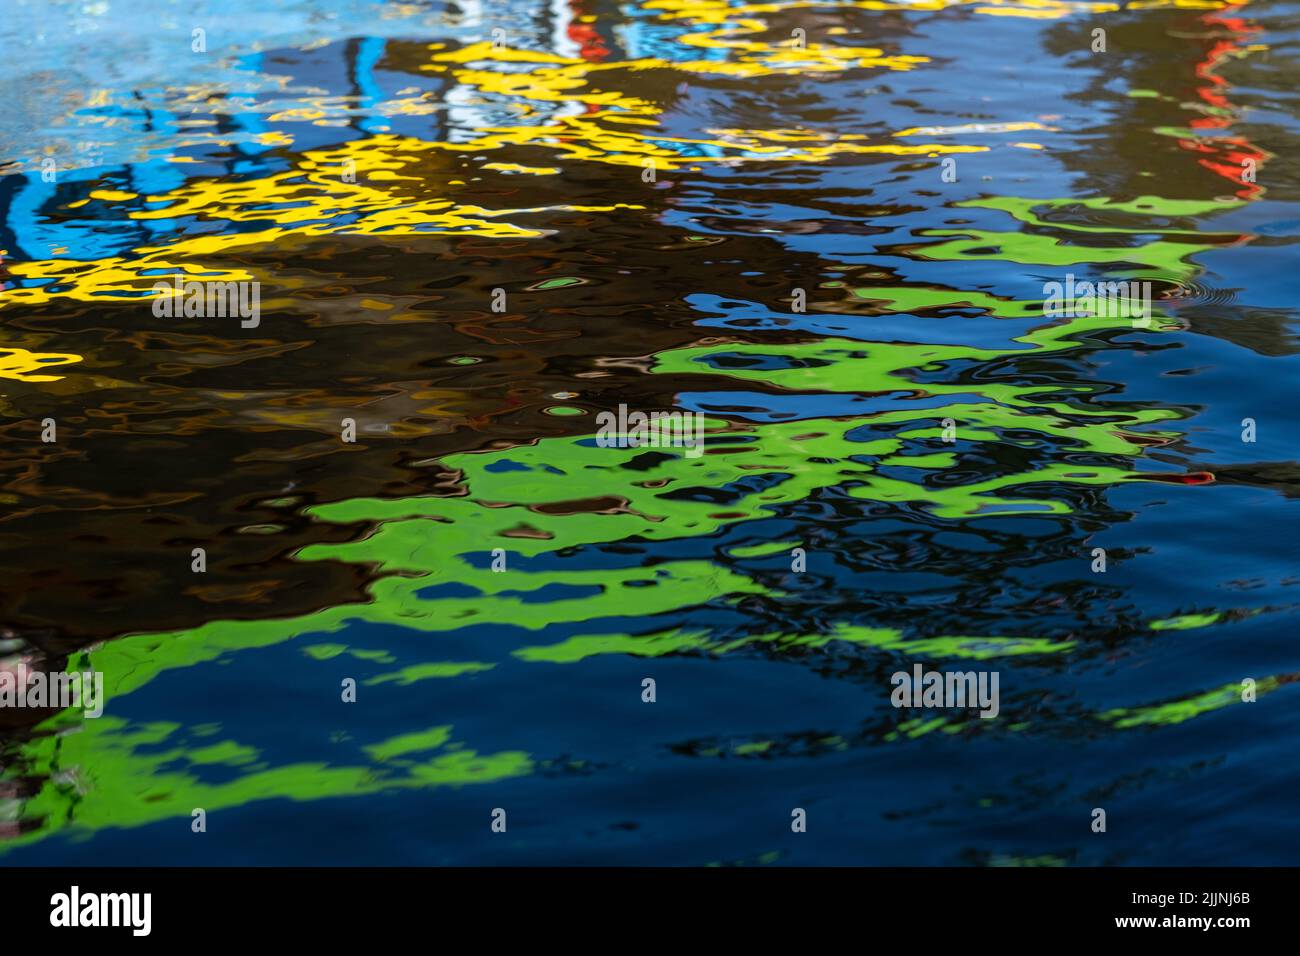 Abstract reflections of the colorful trajinera boats on the water of a canal in Xochimilco, in Mexico City Stock Photo